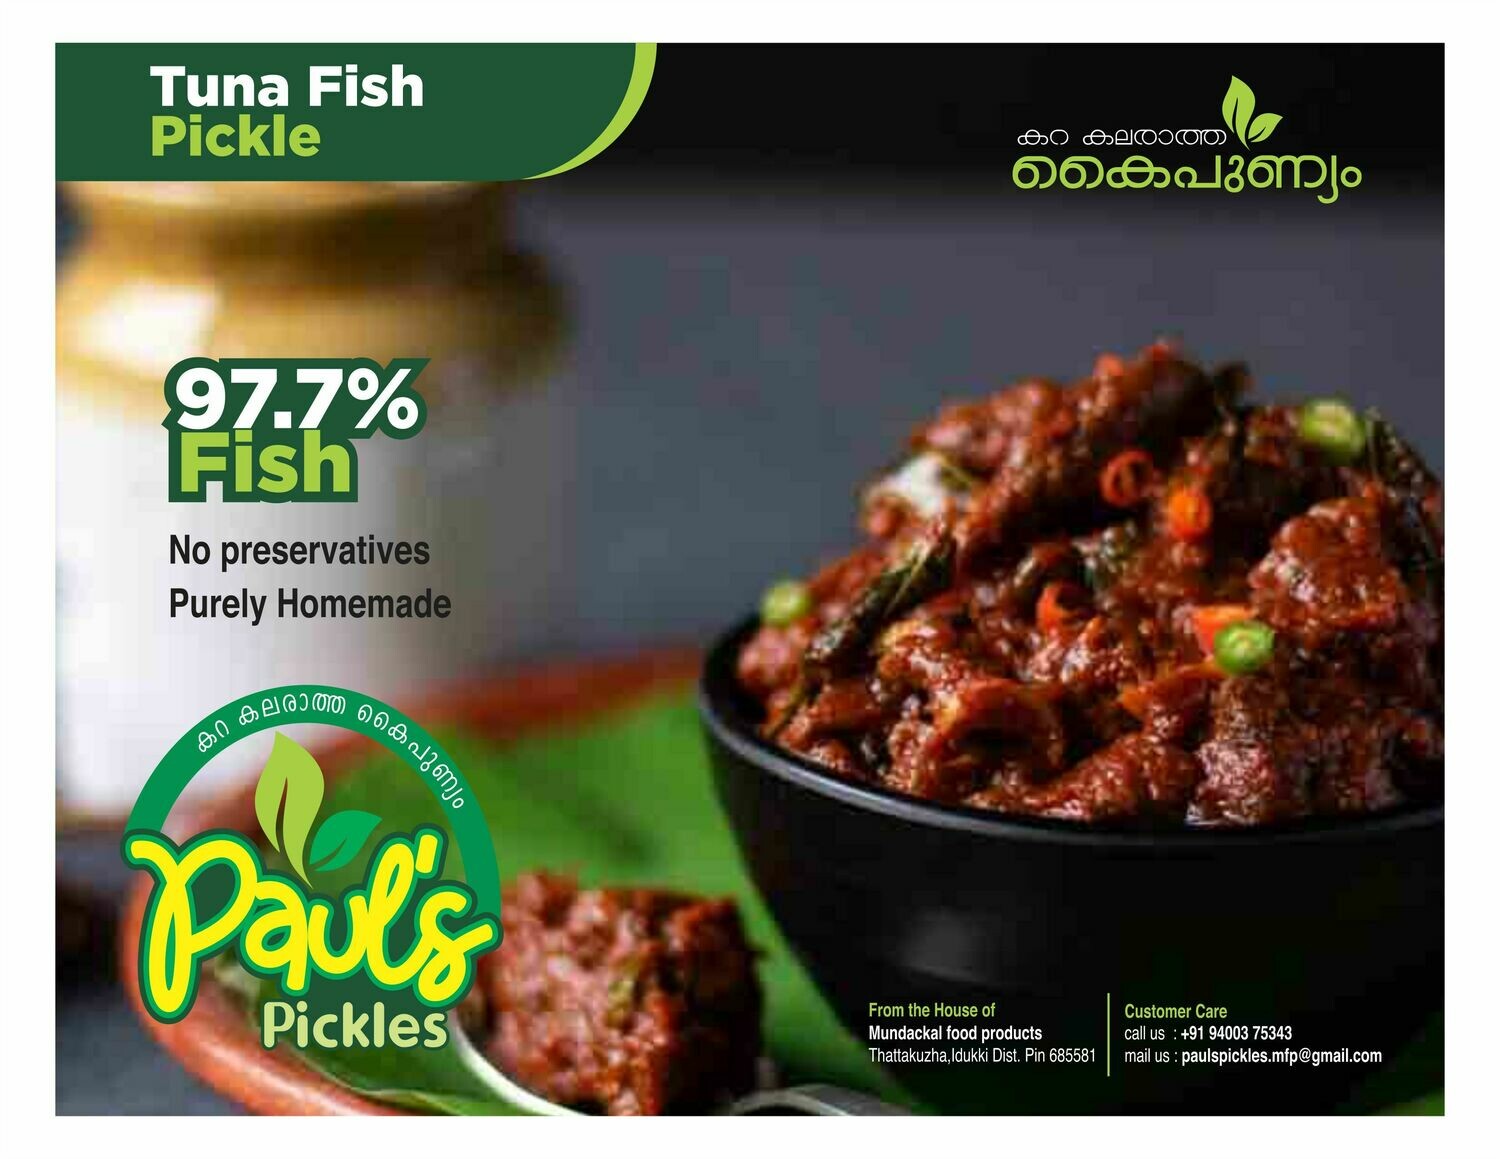 Paul&#39;s Pickles- yellowfin Tuna Fish Pickle (97.7% Fish)- 500g MRP ₹465 (₹50 Off)
-purely homemade
-No added colour
-Free Delivery